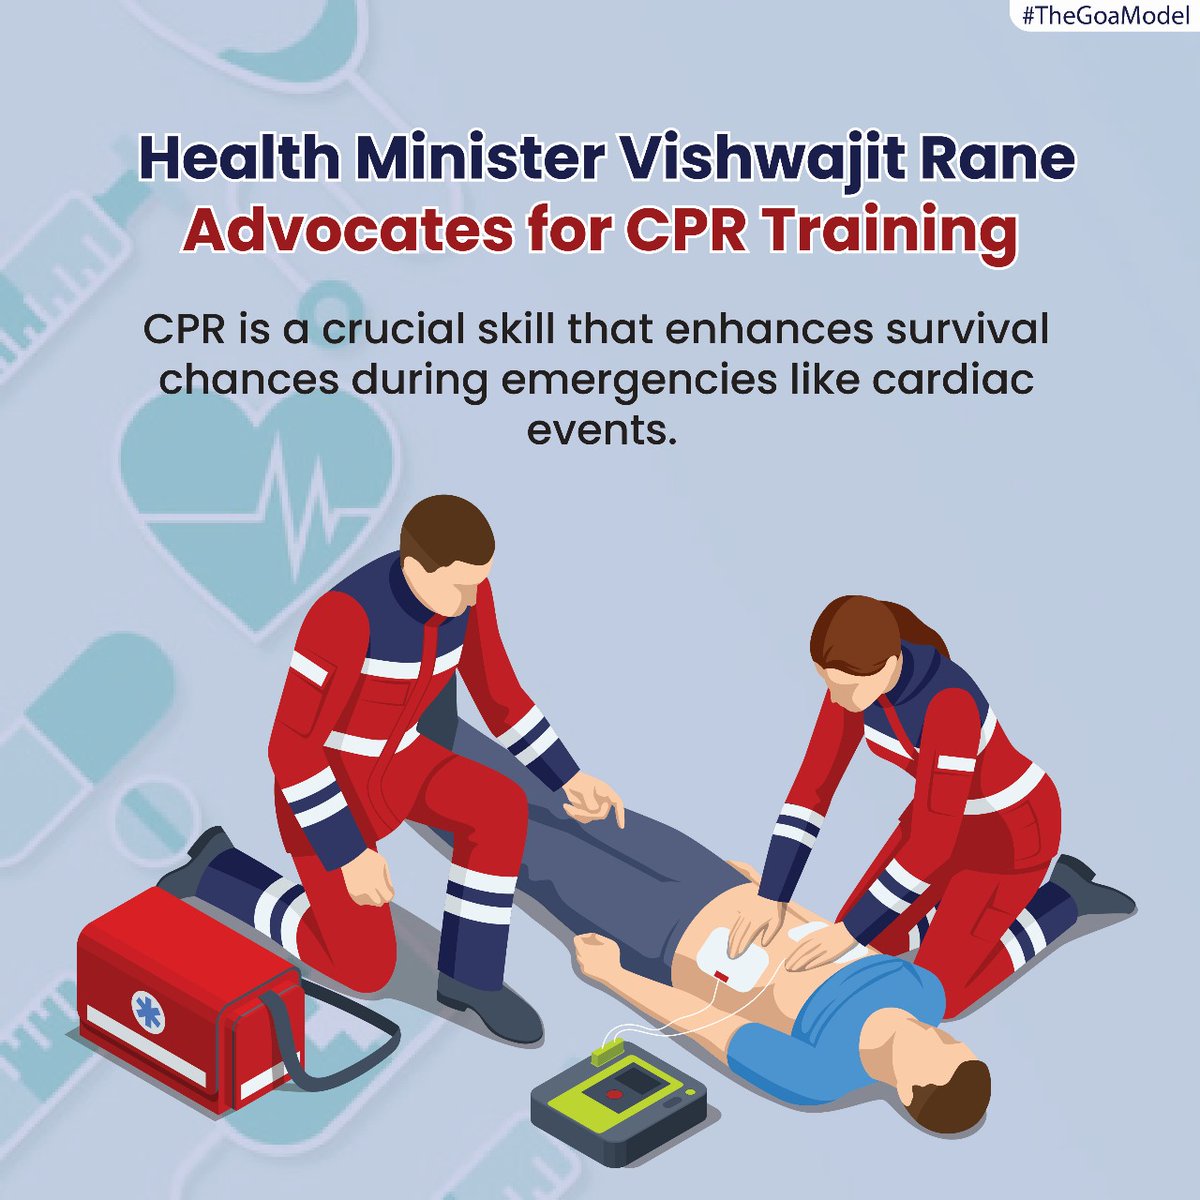 Health Minister Shri Vishwajit Rane emphasizes the importance of CPR training in saving lives. Learn CPR today and become a lifesaver in your community! #CPRTraining #TheGoaModel #ChalYaarSeekheinCPR
 #LifeSavingSkills #HealthAwareness #CommunityHealth #VishwajitRane